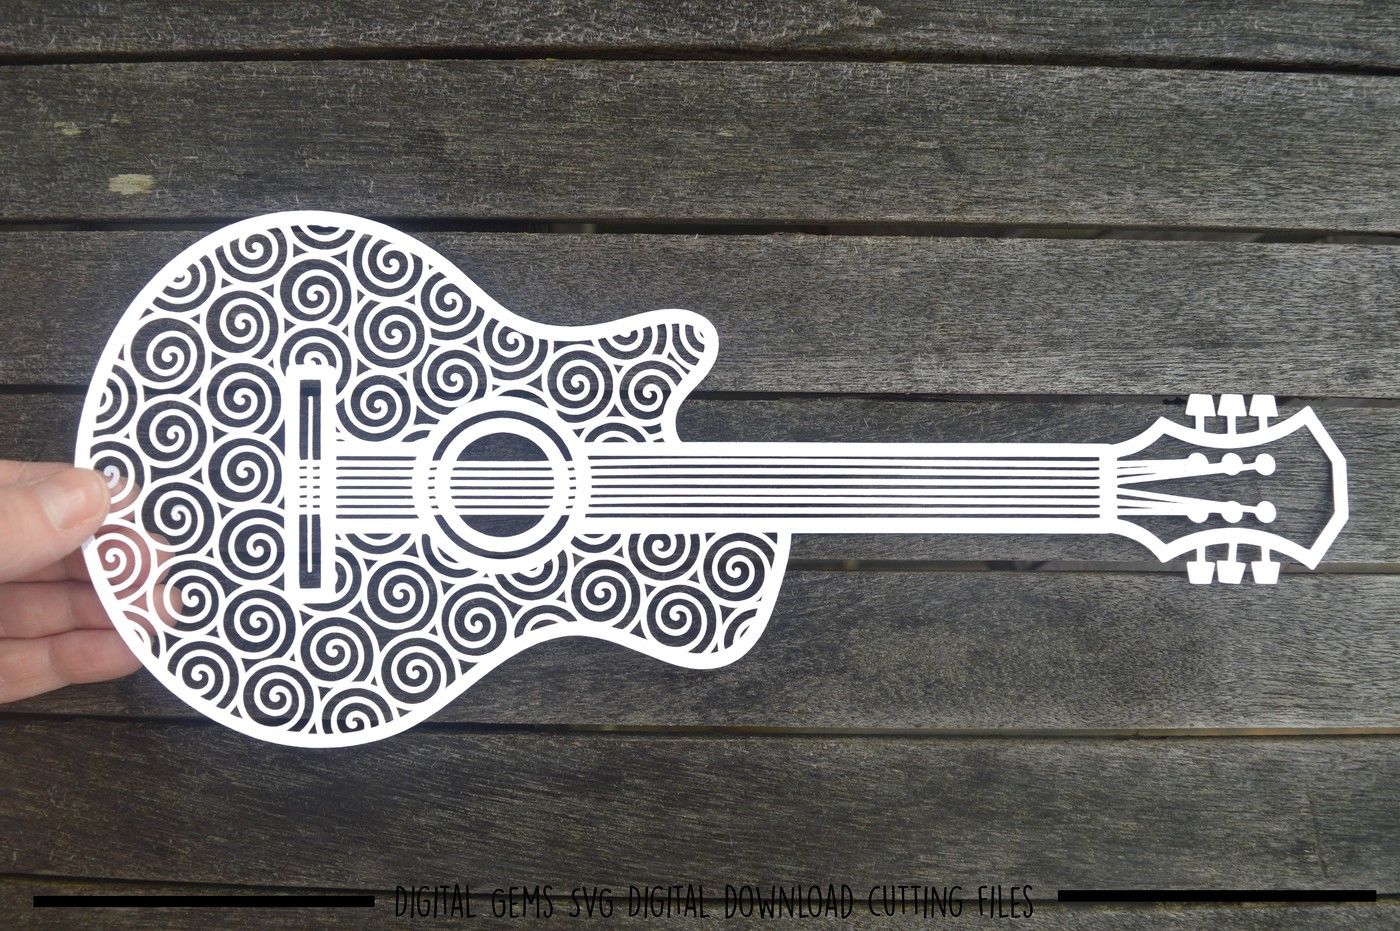 Download Guitar paper cut SVG / DXF / EPS Files By Digital Gems | TheHungryJPEG.com